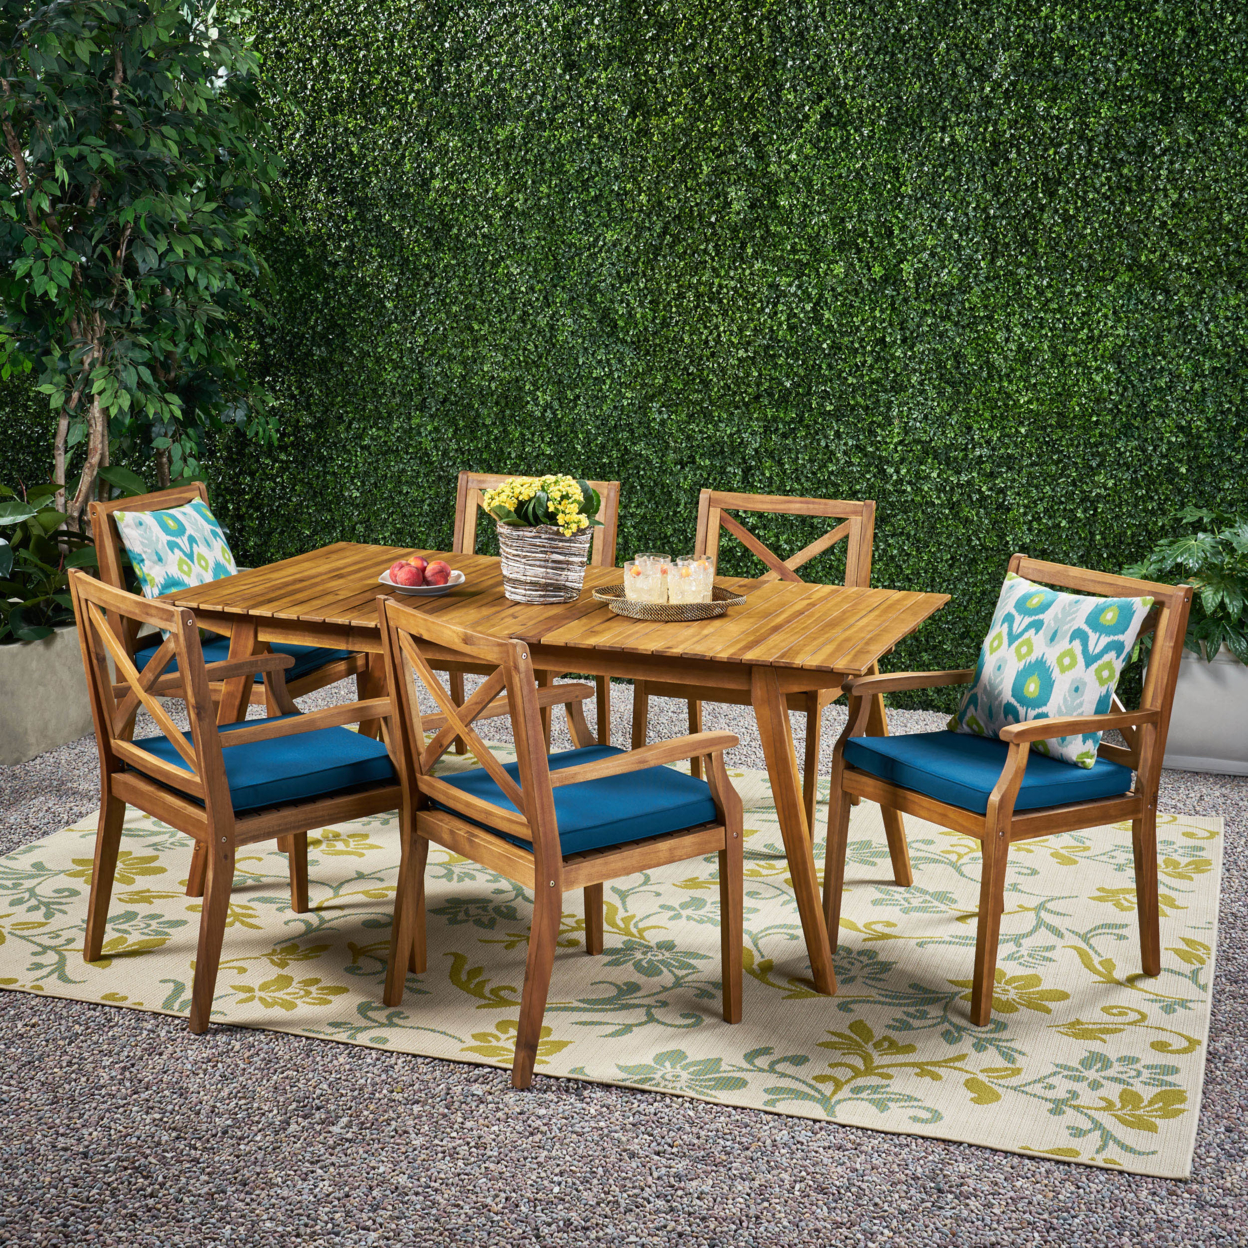 Alva Outdoor 6 Seater Acacia Wood Dining Set With Cushions